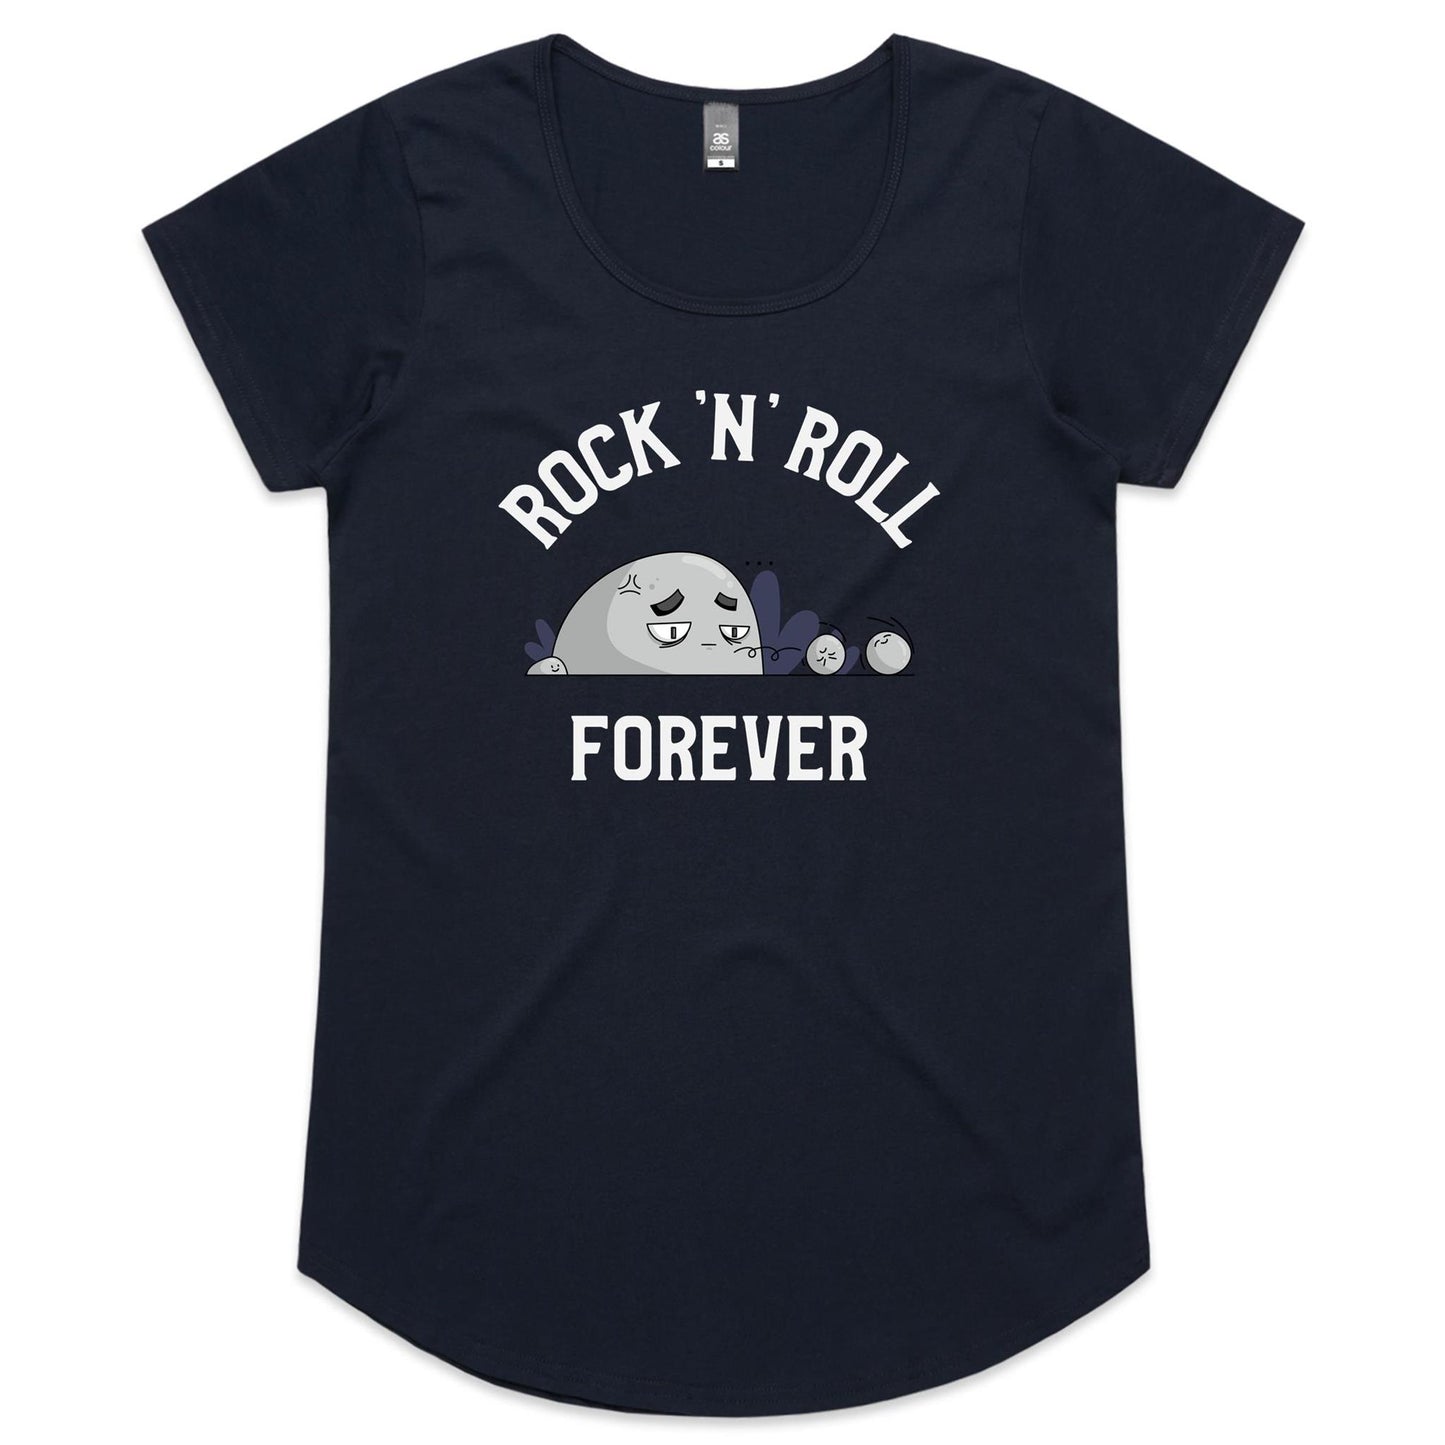 Rock 'N' Roll Forever - Womens Scoop Neck T-Shirt Navy Womens Scoop Neck T-shirt Music